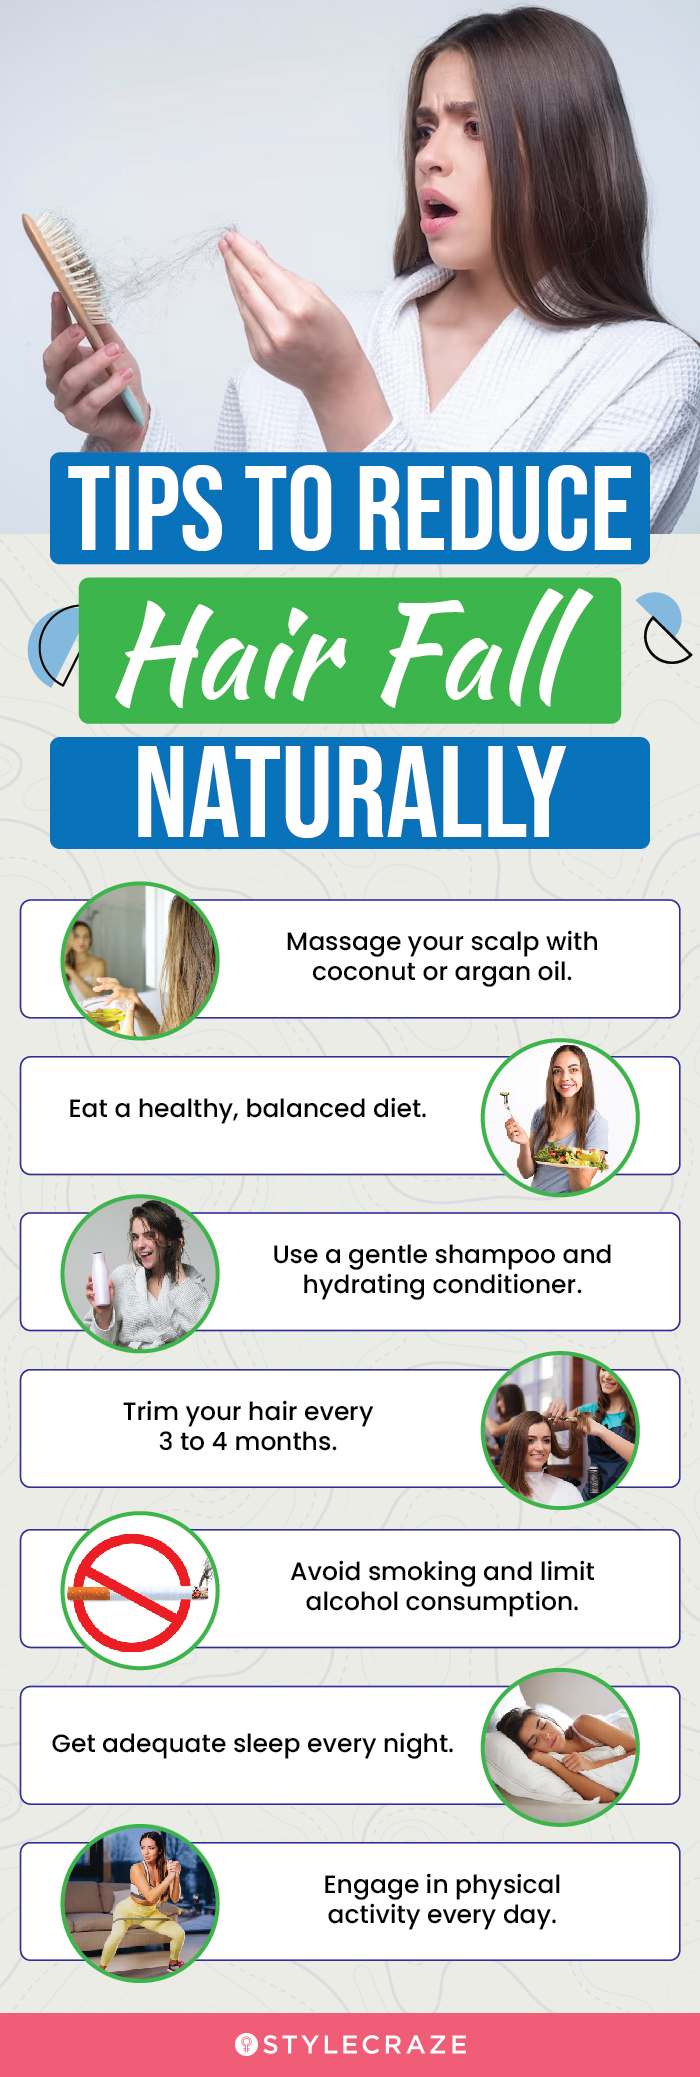 tips to reduce hair fall naturally (infographic)